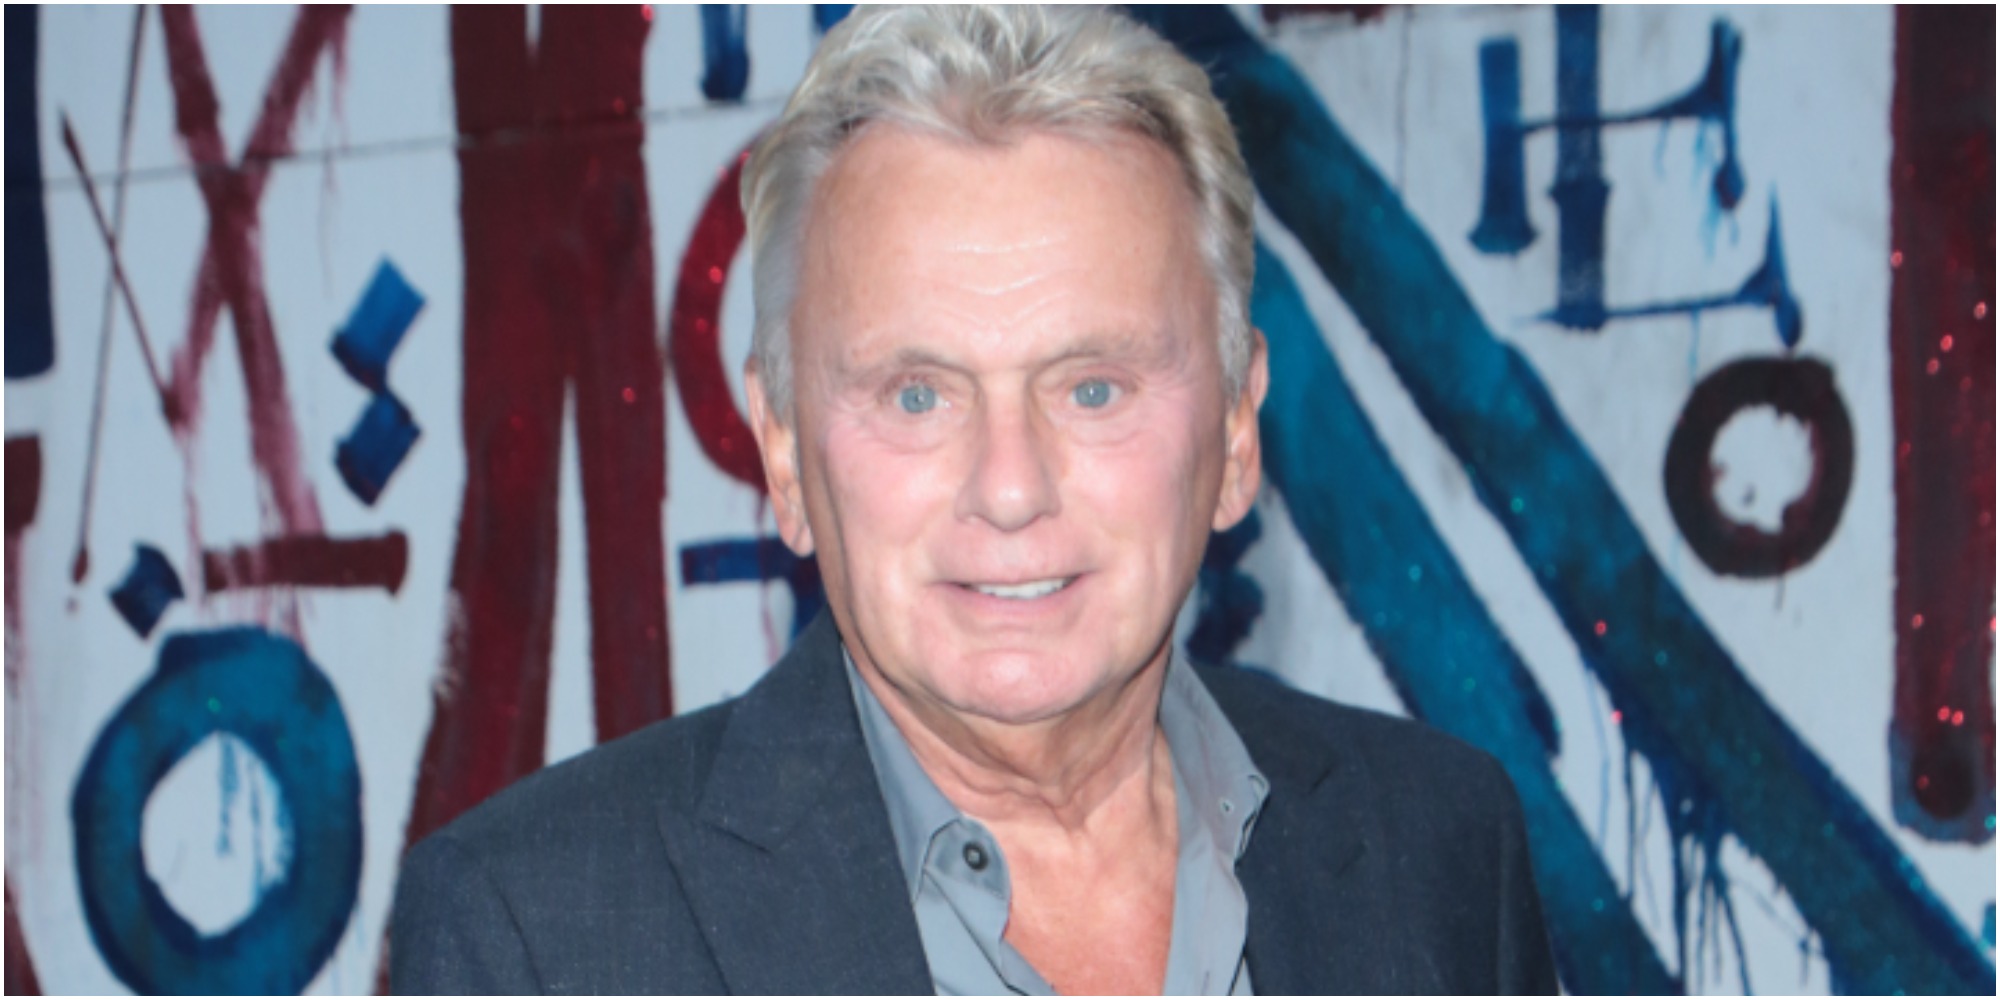 Pat Sajak is the host of Wheel of Fortune.